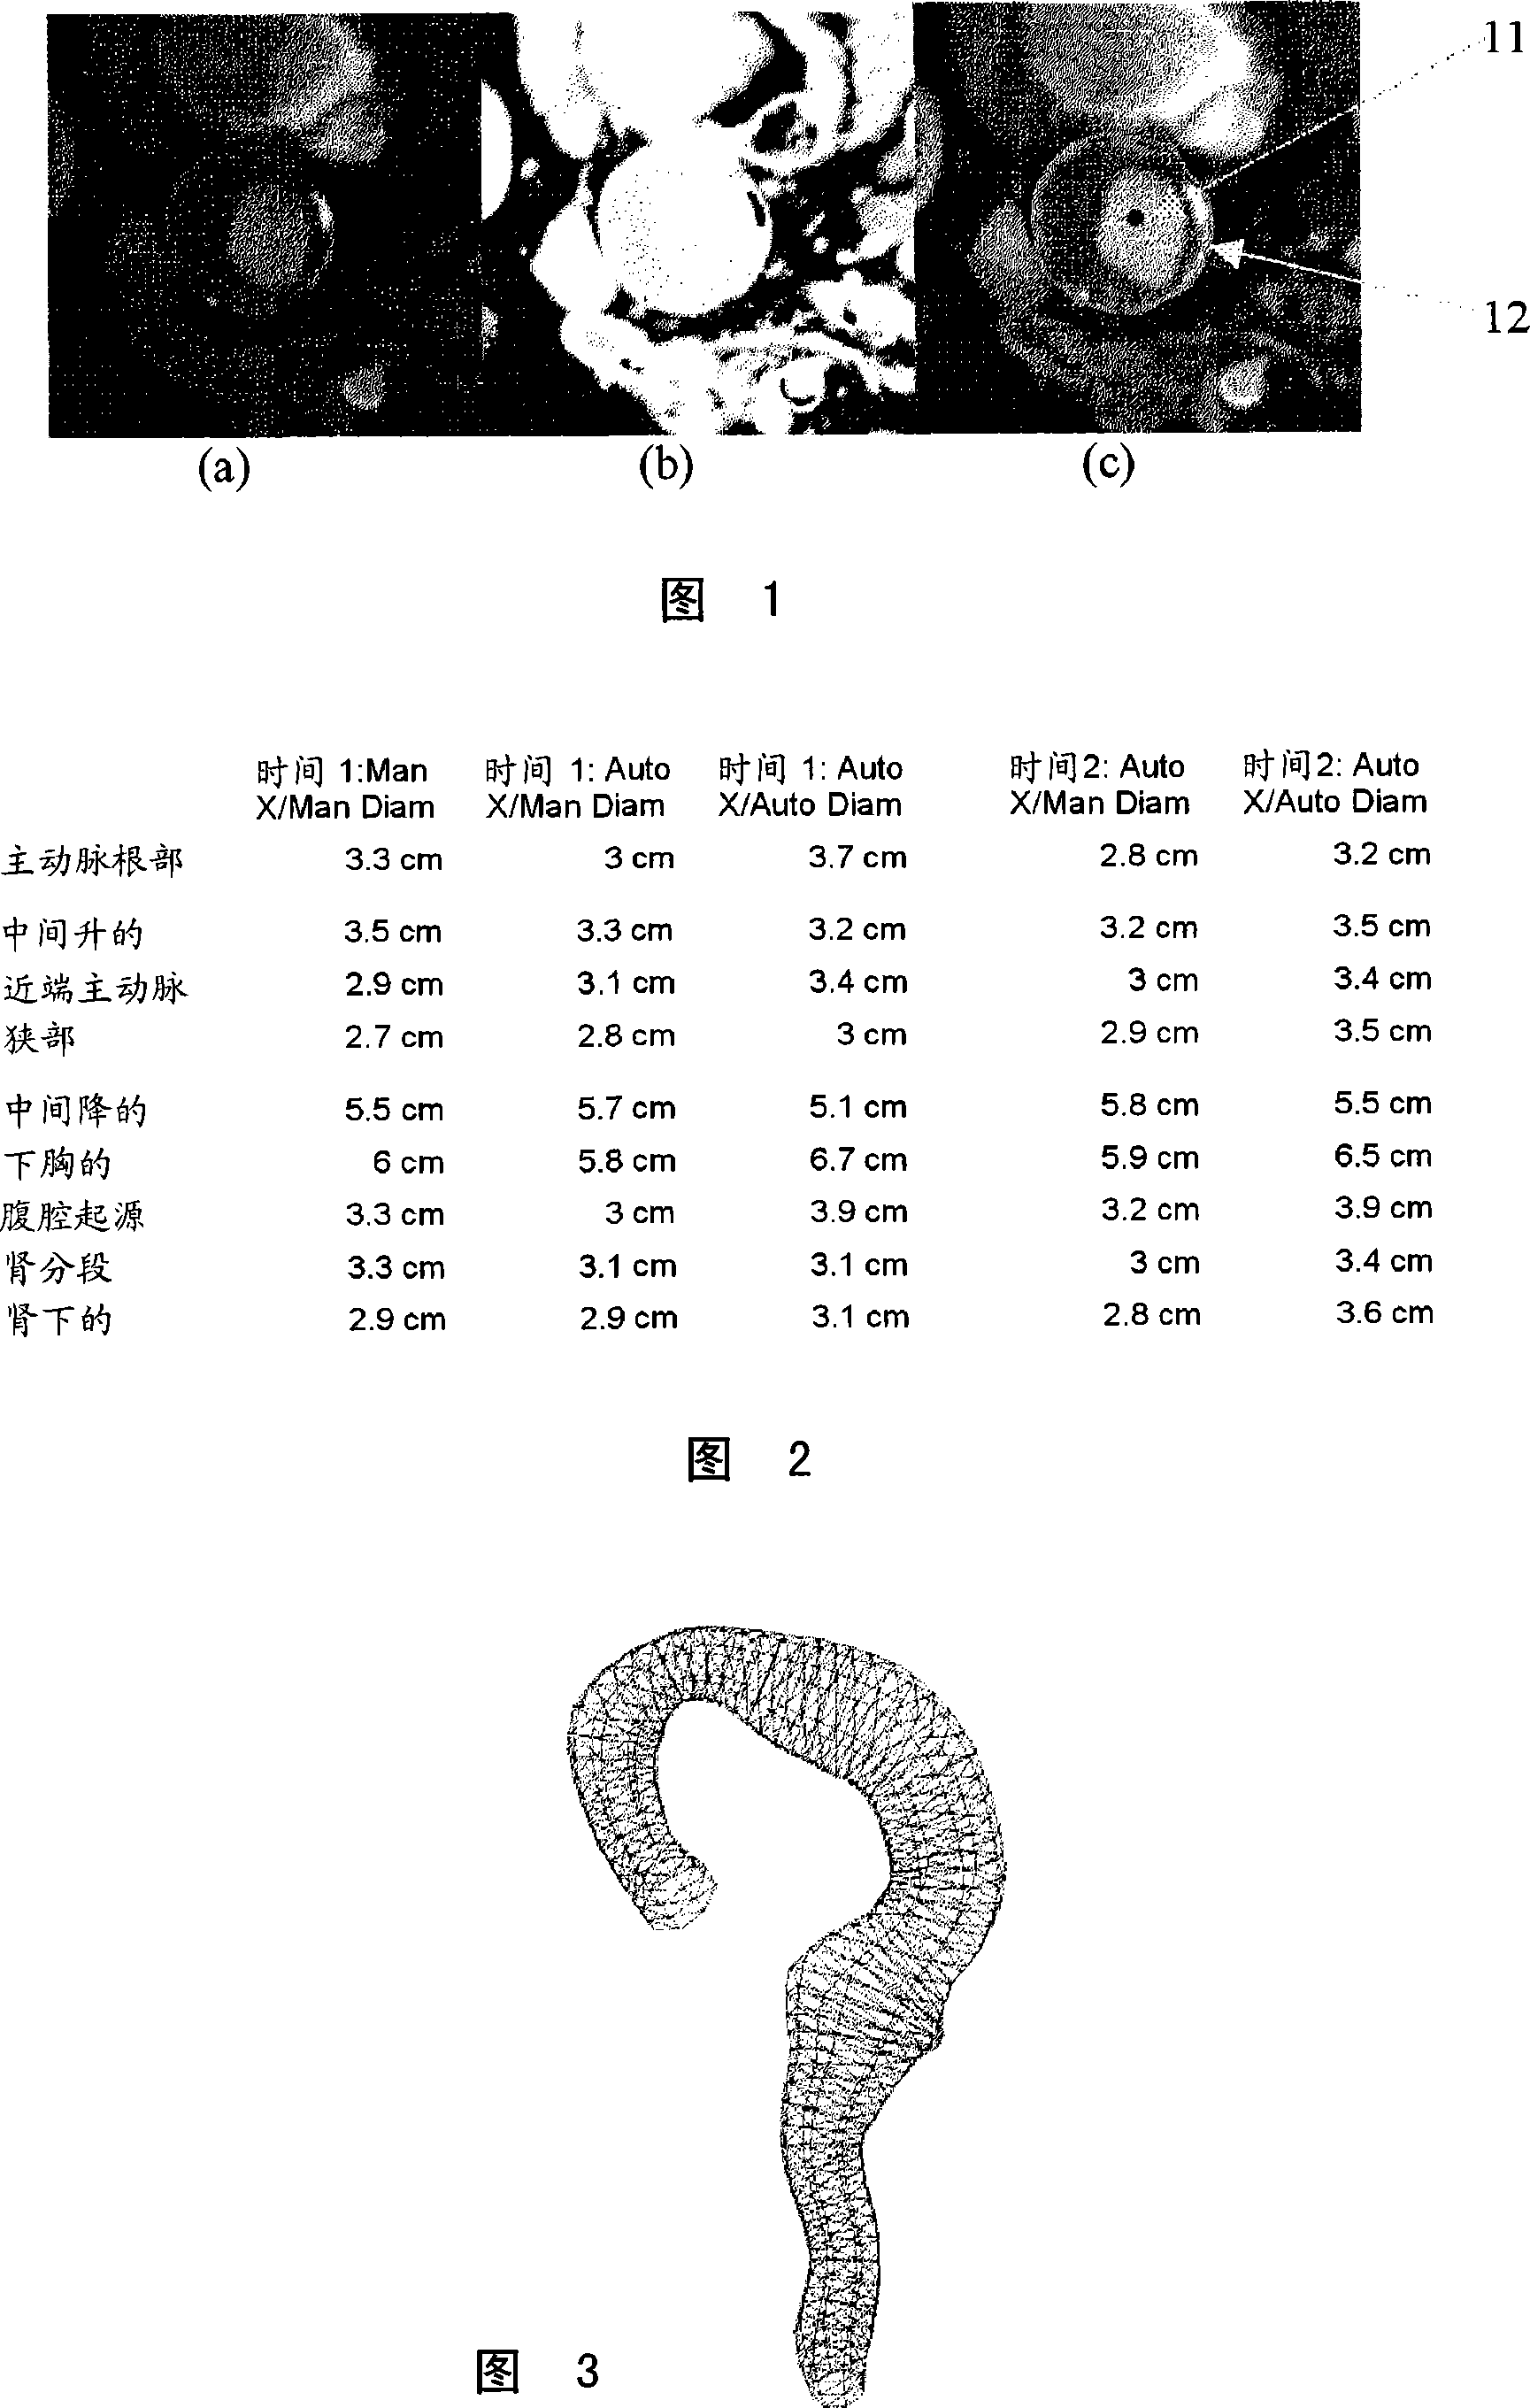 System and method for semi-automatic aortic aneurysm analysis